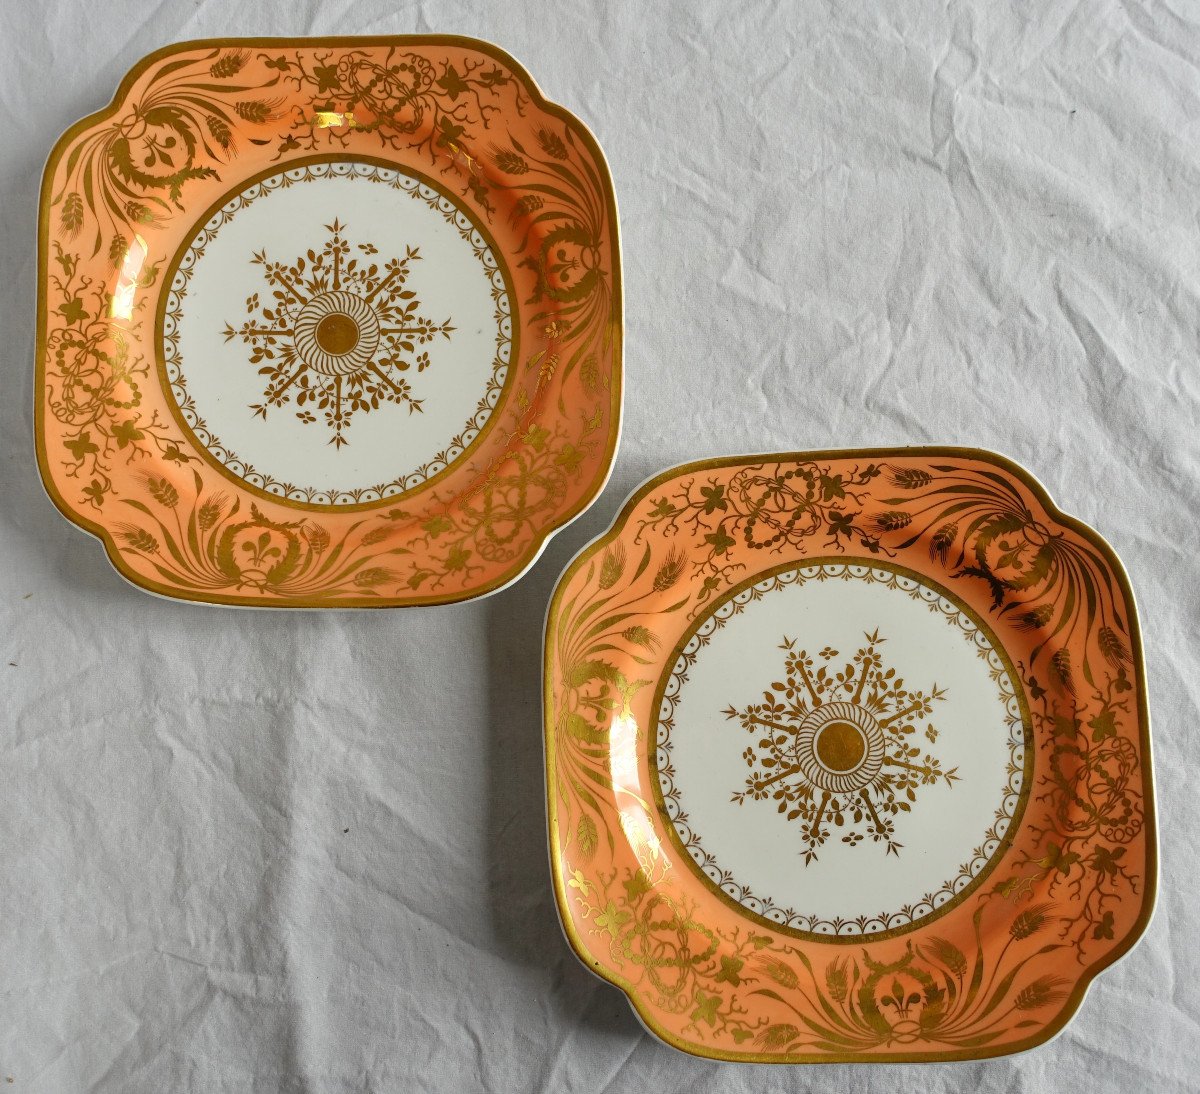 Manufacture Spode - Pair Of Cake Plates In Mandarin Porcelain And Gold - Circa 1820-photo-3